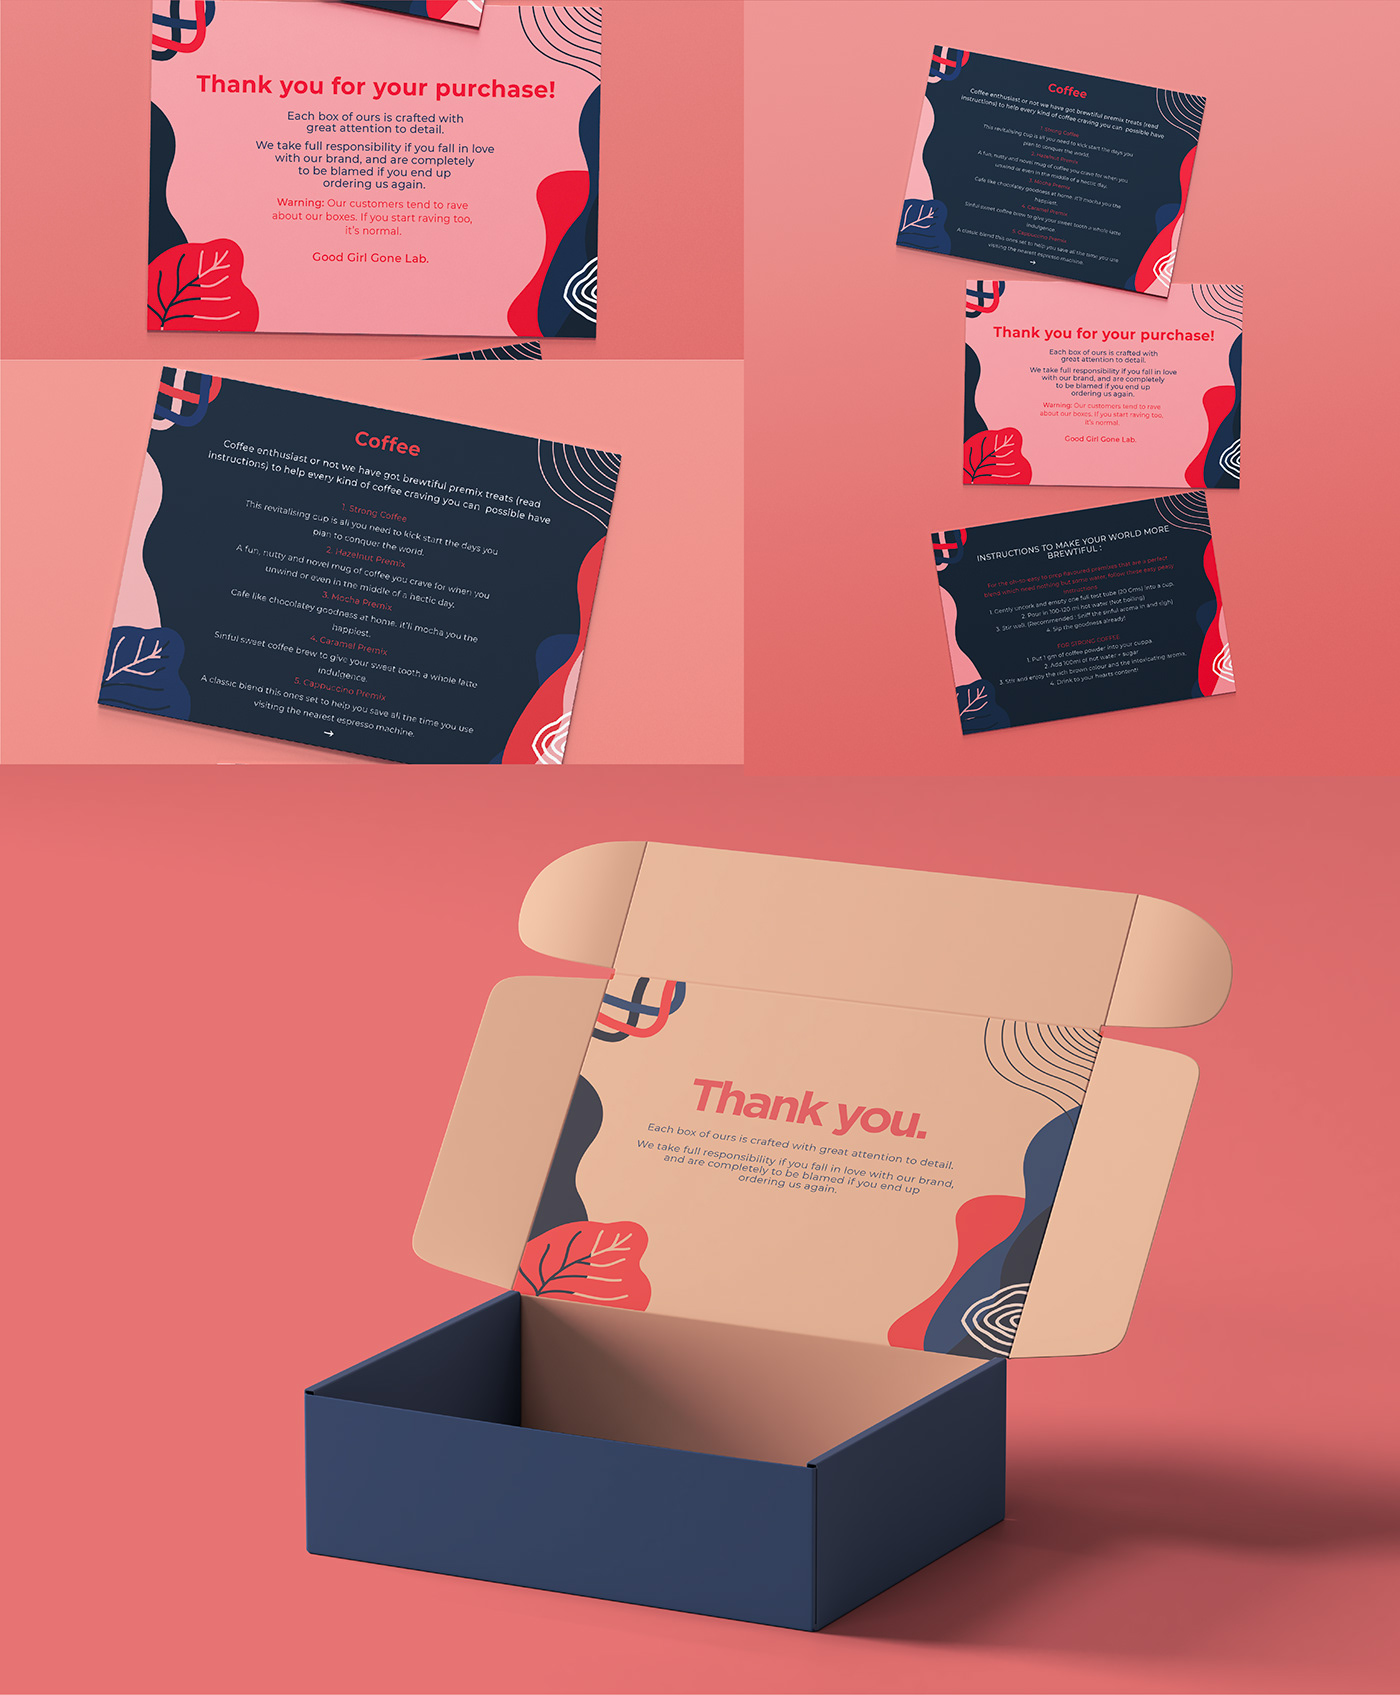 box experiments gift mailer Packaging subscription graphic design  ILLUSTRATION  girl pink